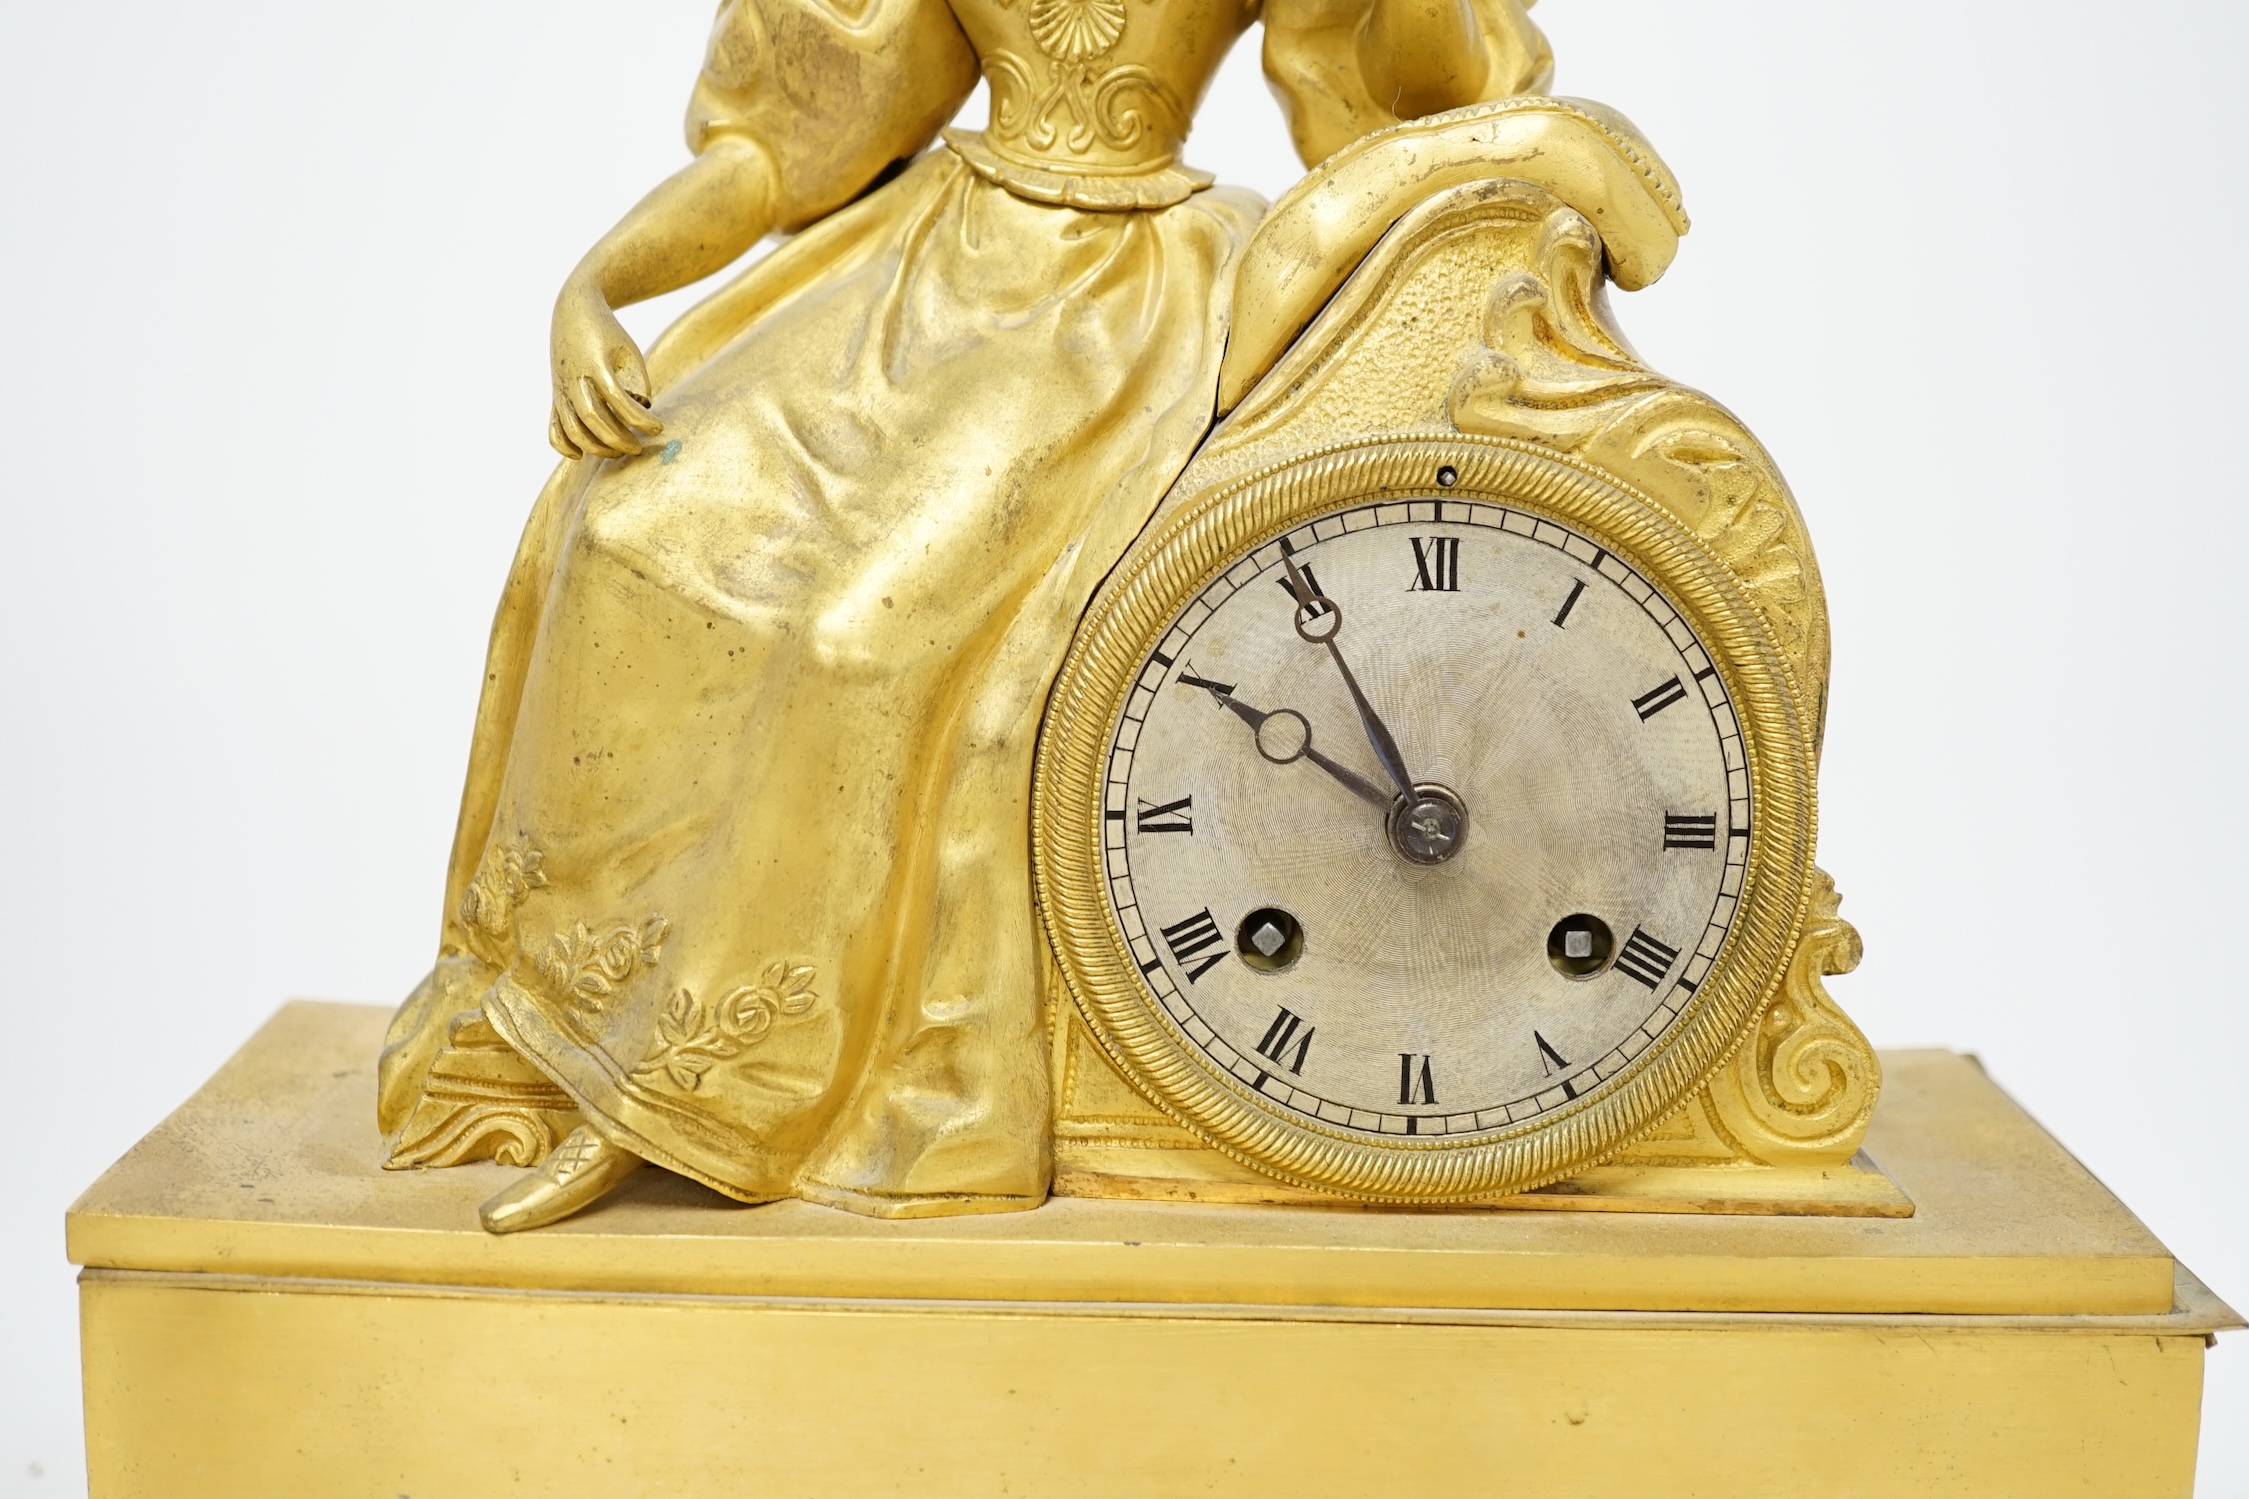 A 19th century French ormolu mantel clock, surmounted with a lady, with key and pendulum, 36cm high. Condition - poor